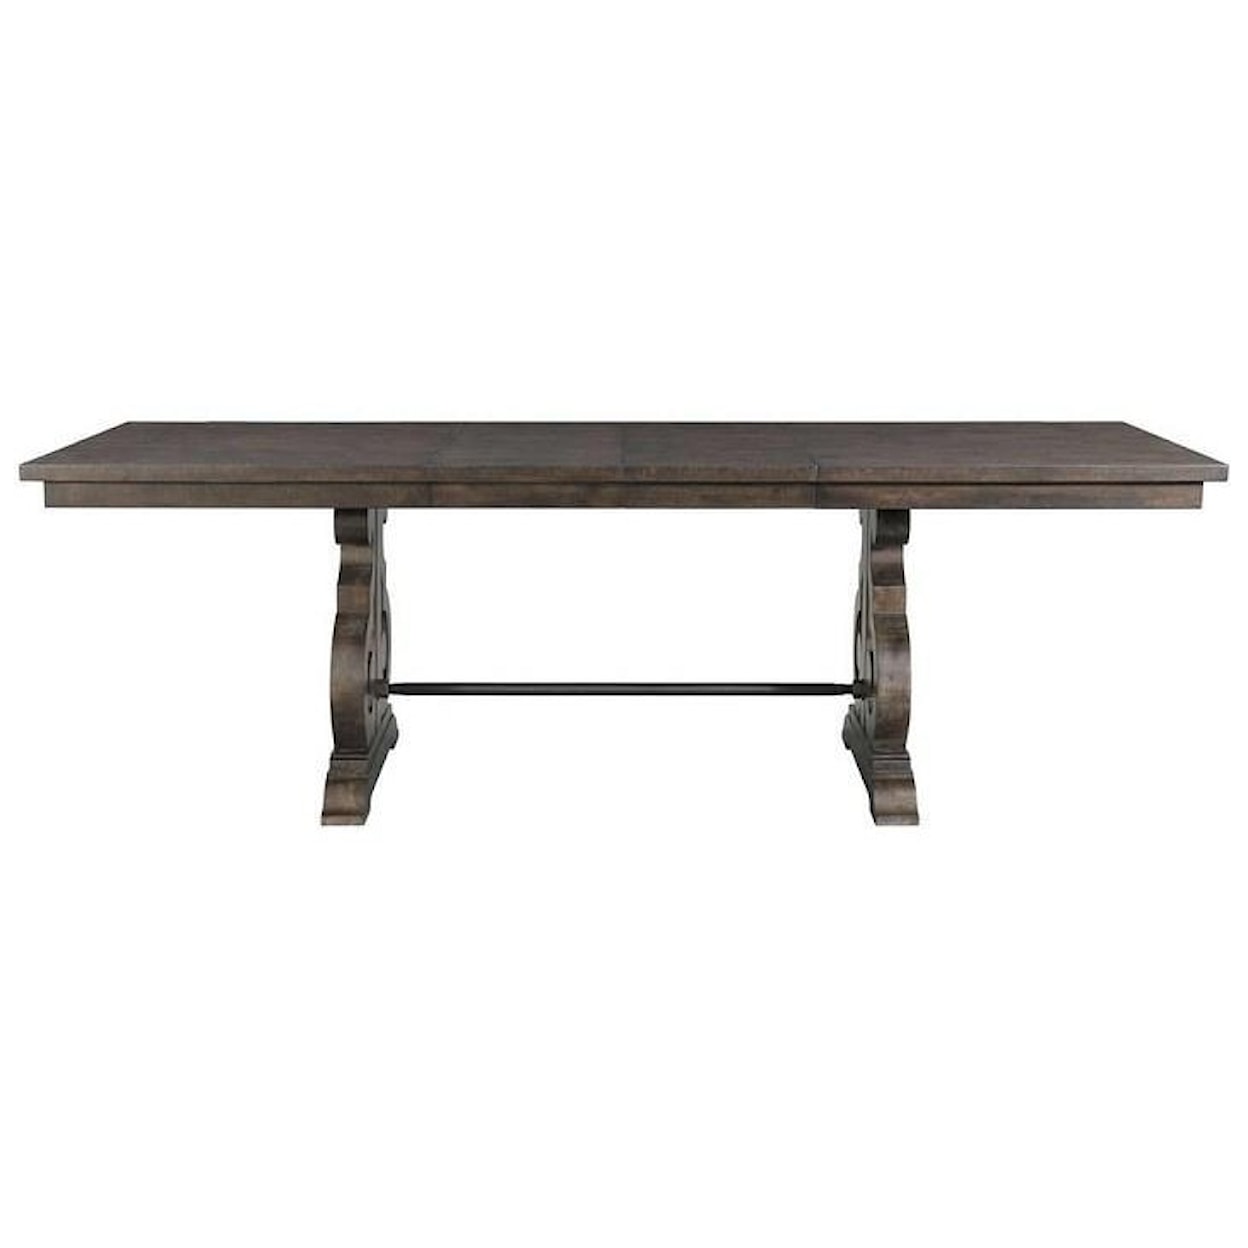 Elements International Stone Counter Height Rectangular Dining Table